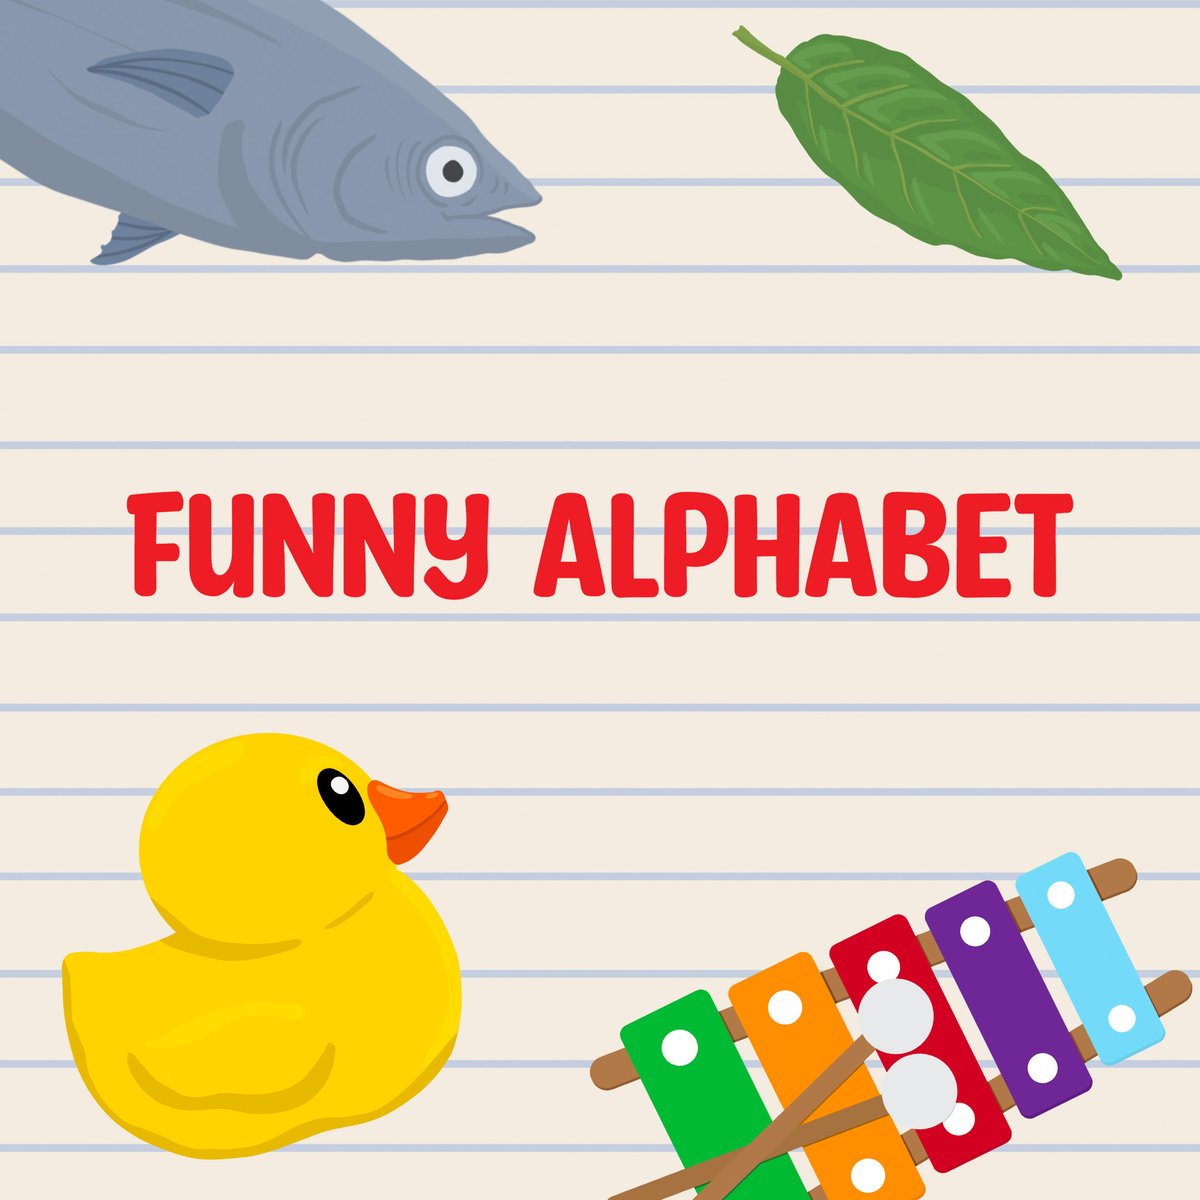 Funny Alphabet is finally out now! 🦆

EU:
PS4 bit.ly/4678lbm
PS5 bit.ly/3p8fDen

US:
PS4 bit.ly/3qN4srQ
PS5 bit.ly/466nTMI